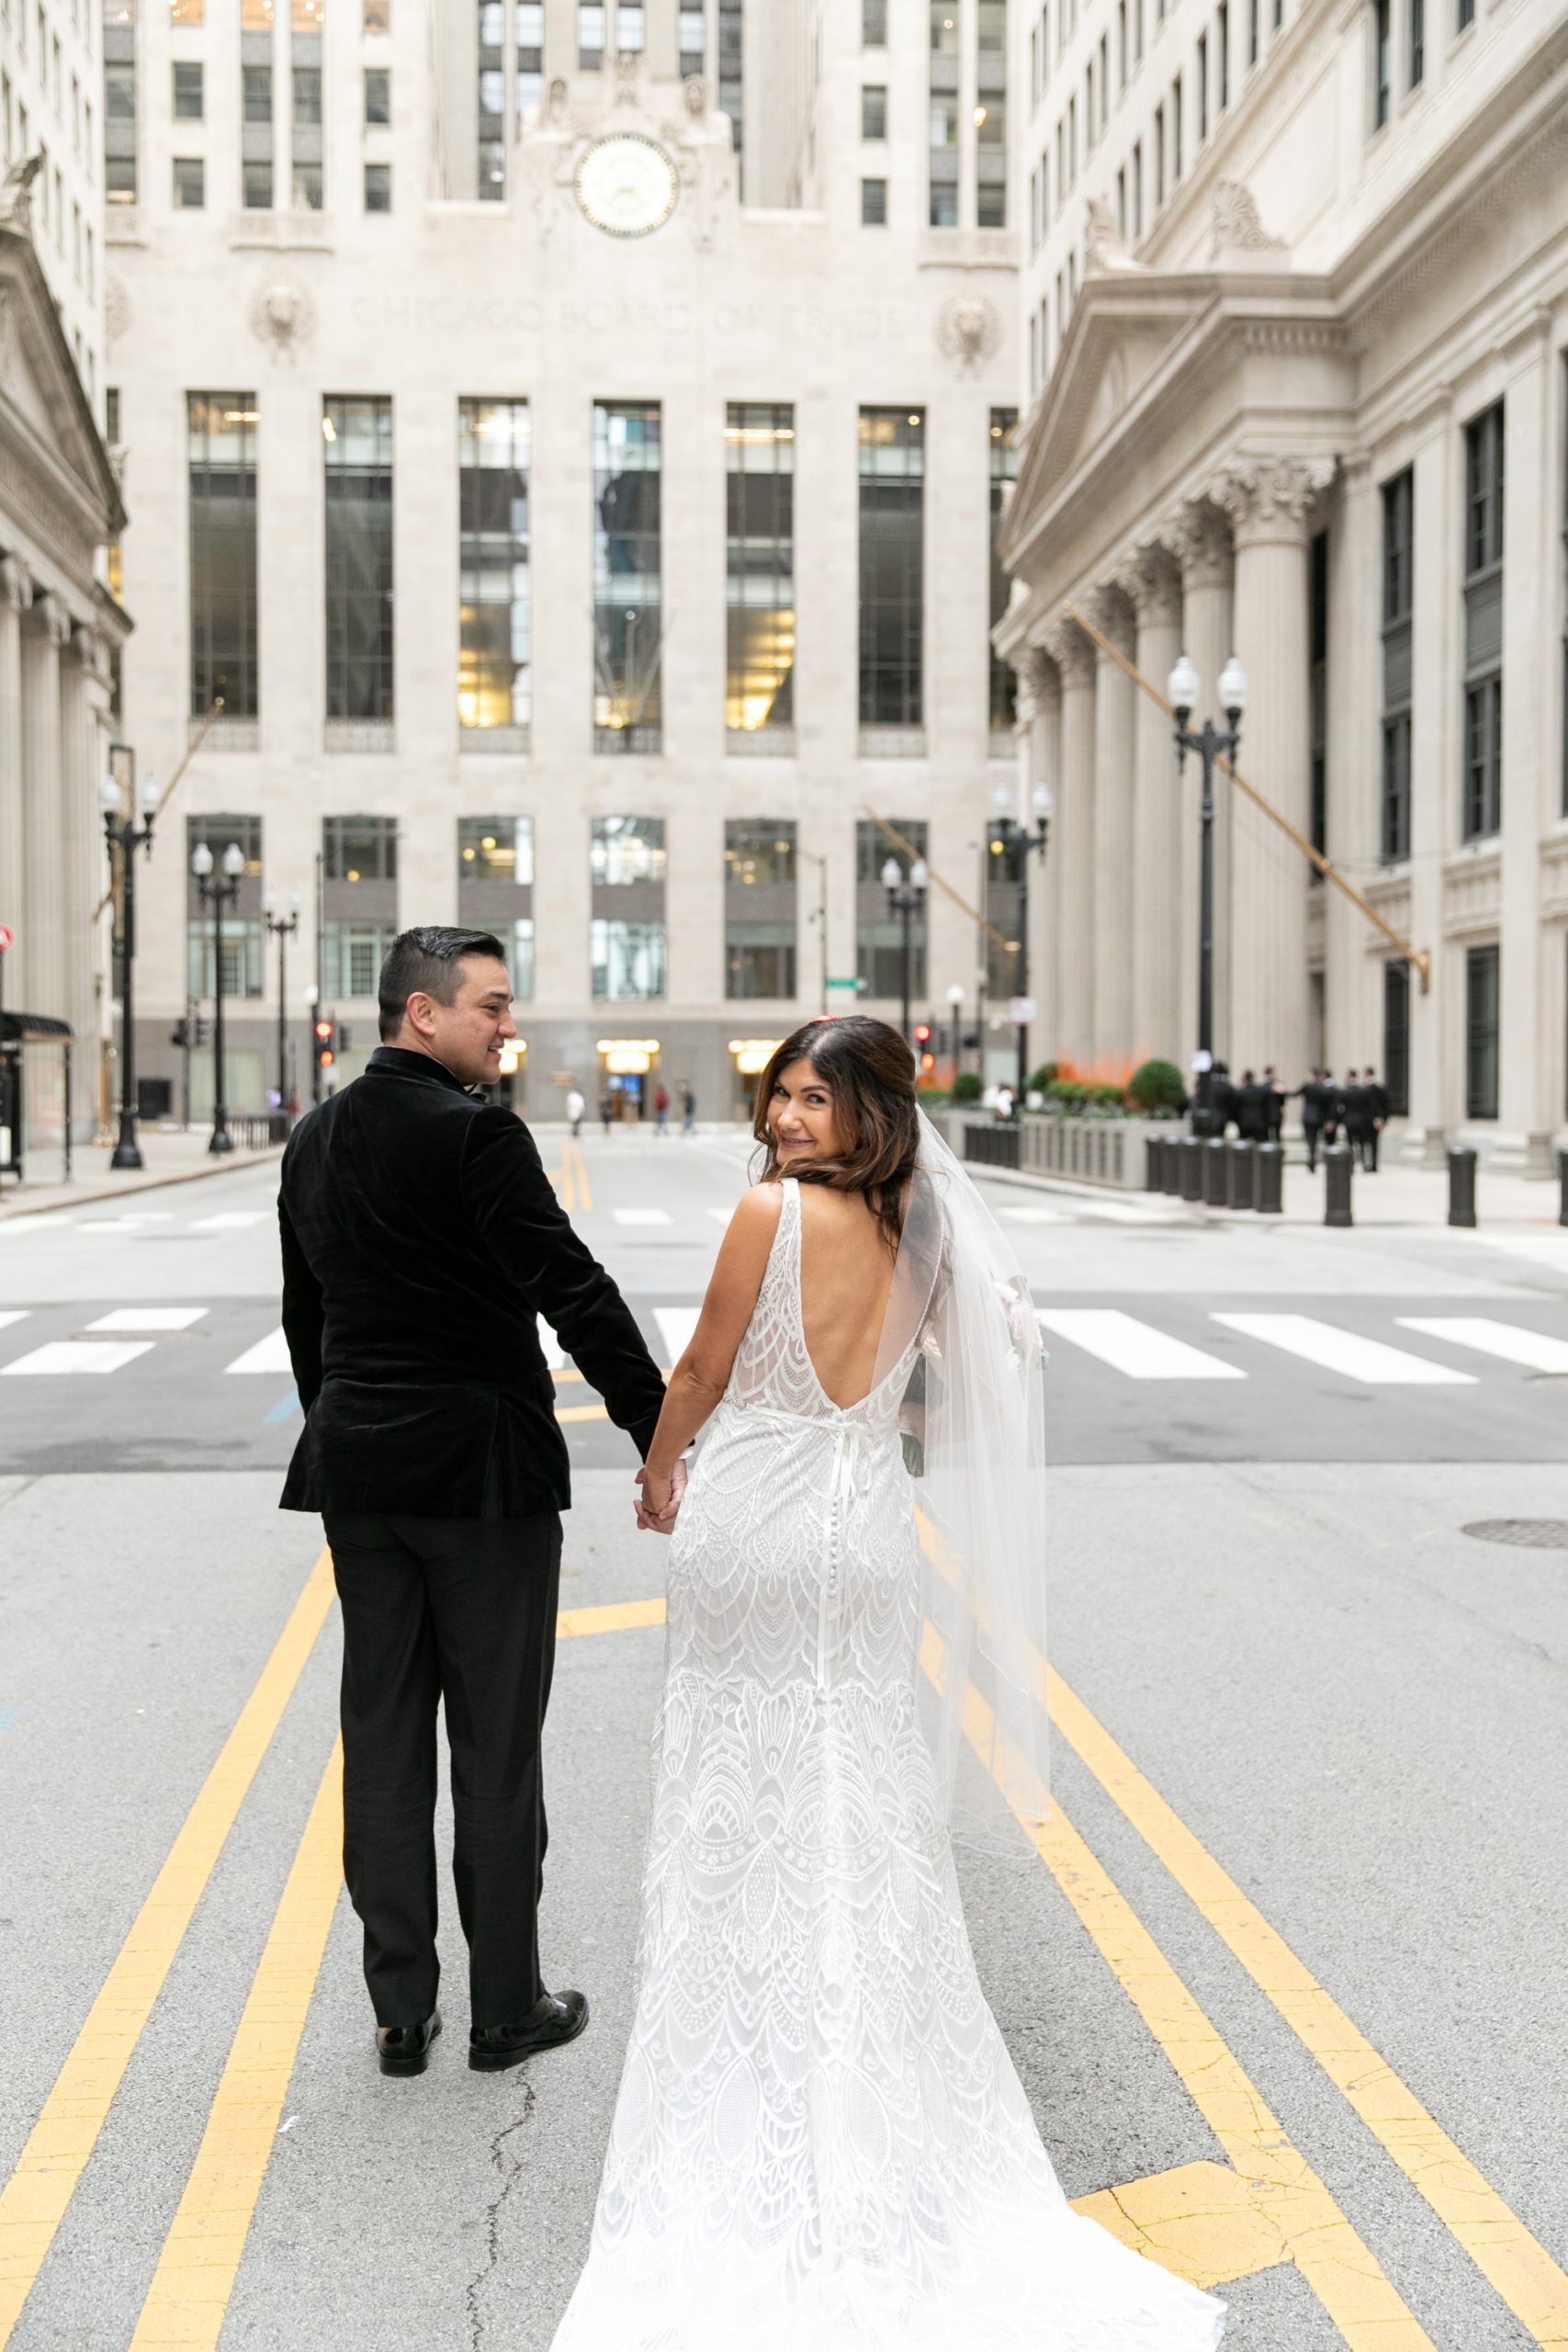 the bride and groom posed for downtown Chicago wedding photos